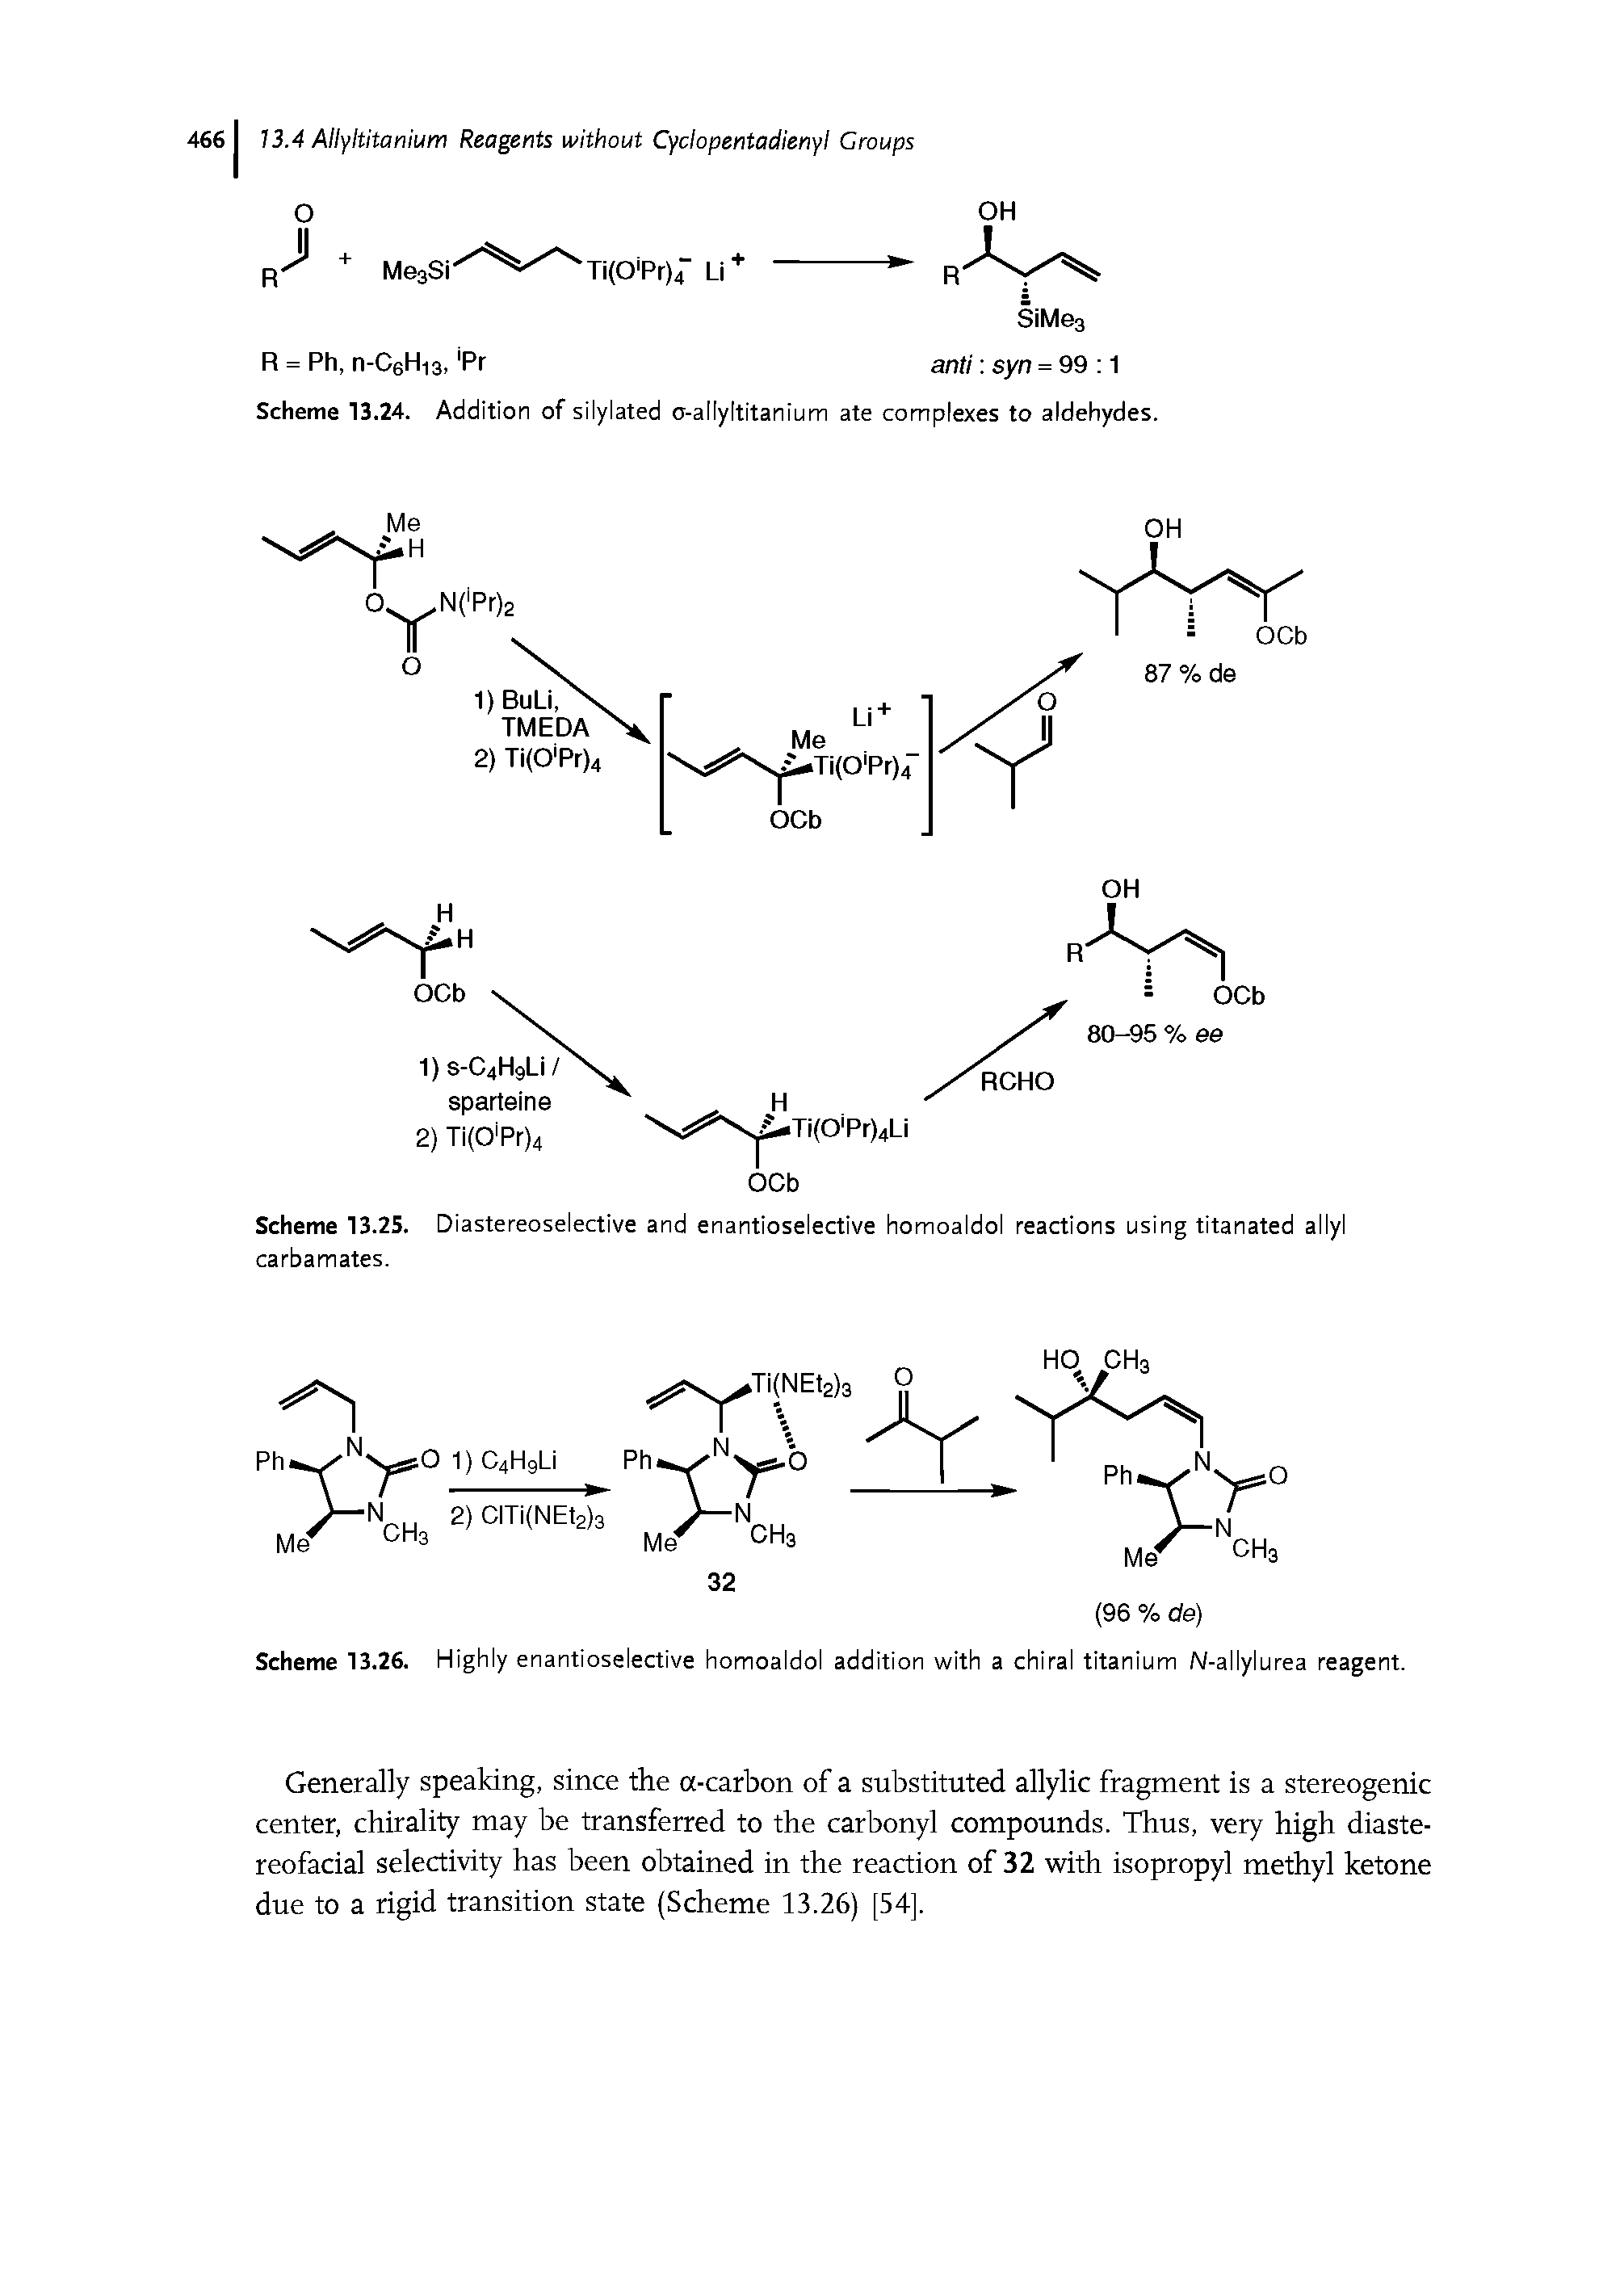 Scheme 13.26. Highly enantioselective homoaldol addition with a chiral titanium N-allylurea reagent.